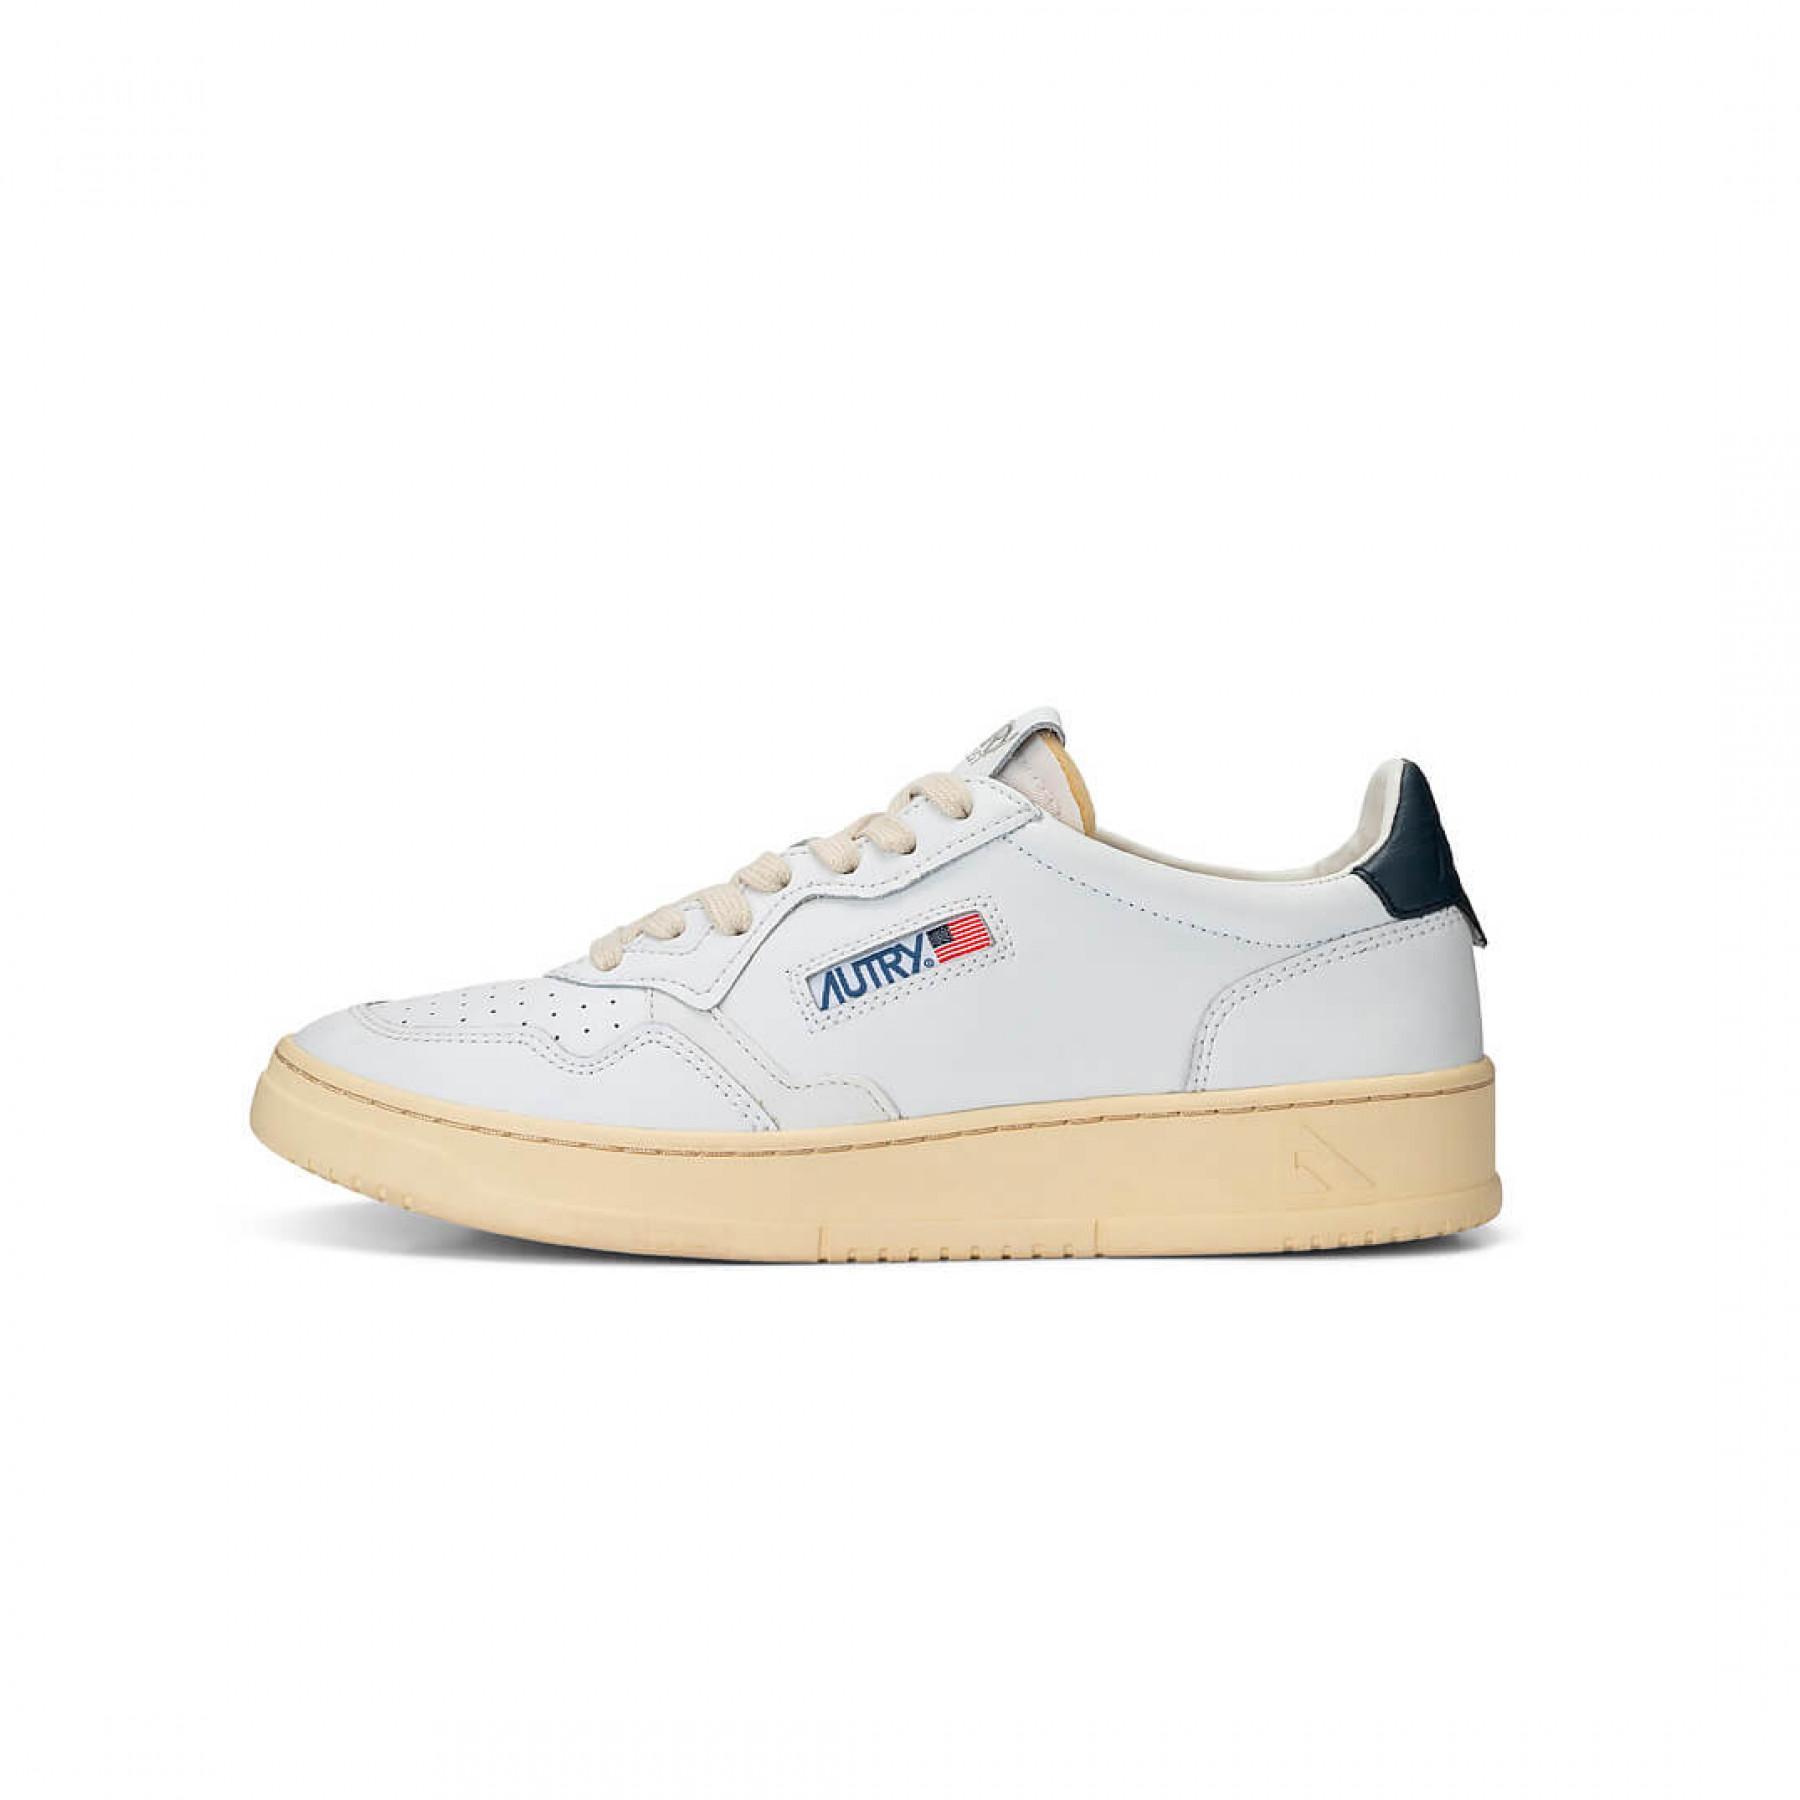 Sneakers Autry Medalist LL12 Leather White/Navy Blue